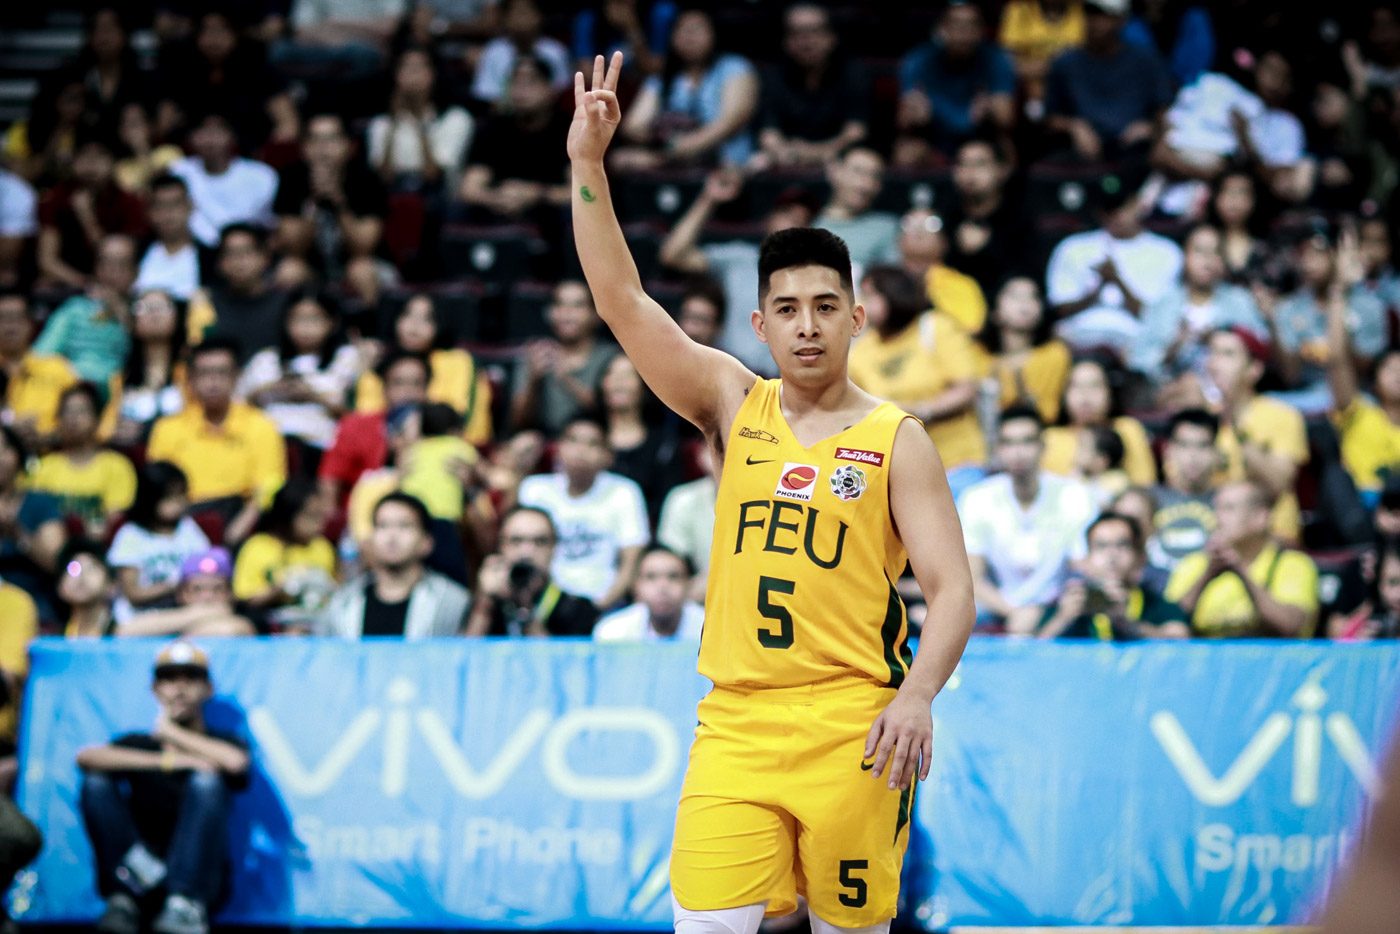 Hot-starting FEU nips NU, stays in Final Four chase